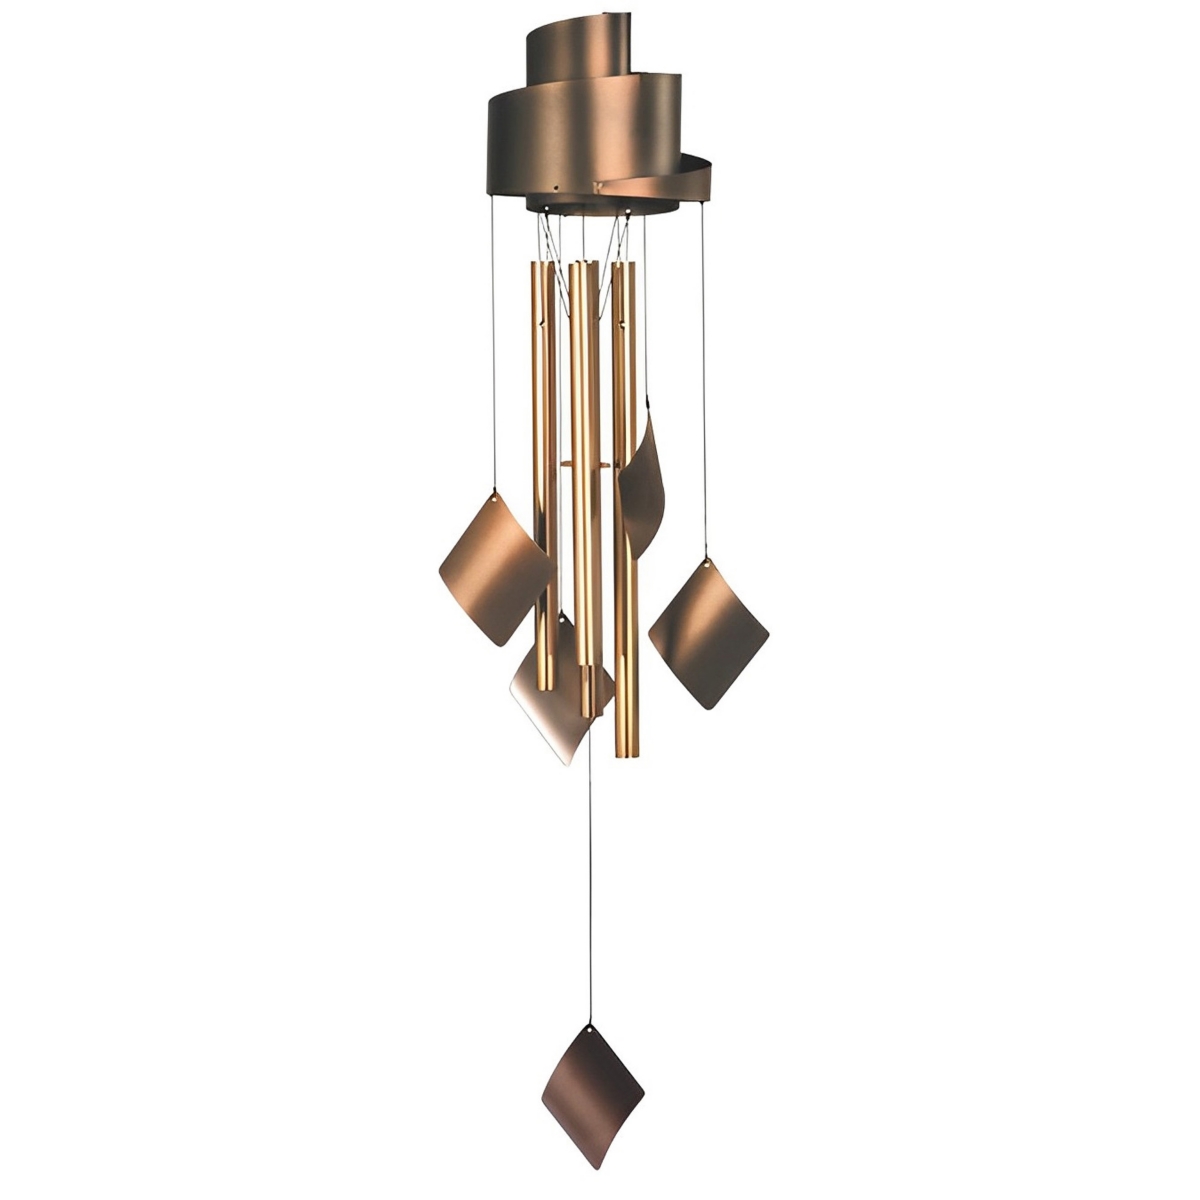 32" Long Bronze Copper Contemporary Wind Chime Home Decor Perfect Gift for House Warming, Holidays and Birthdays - Bronze